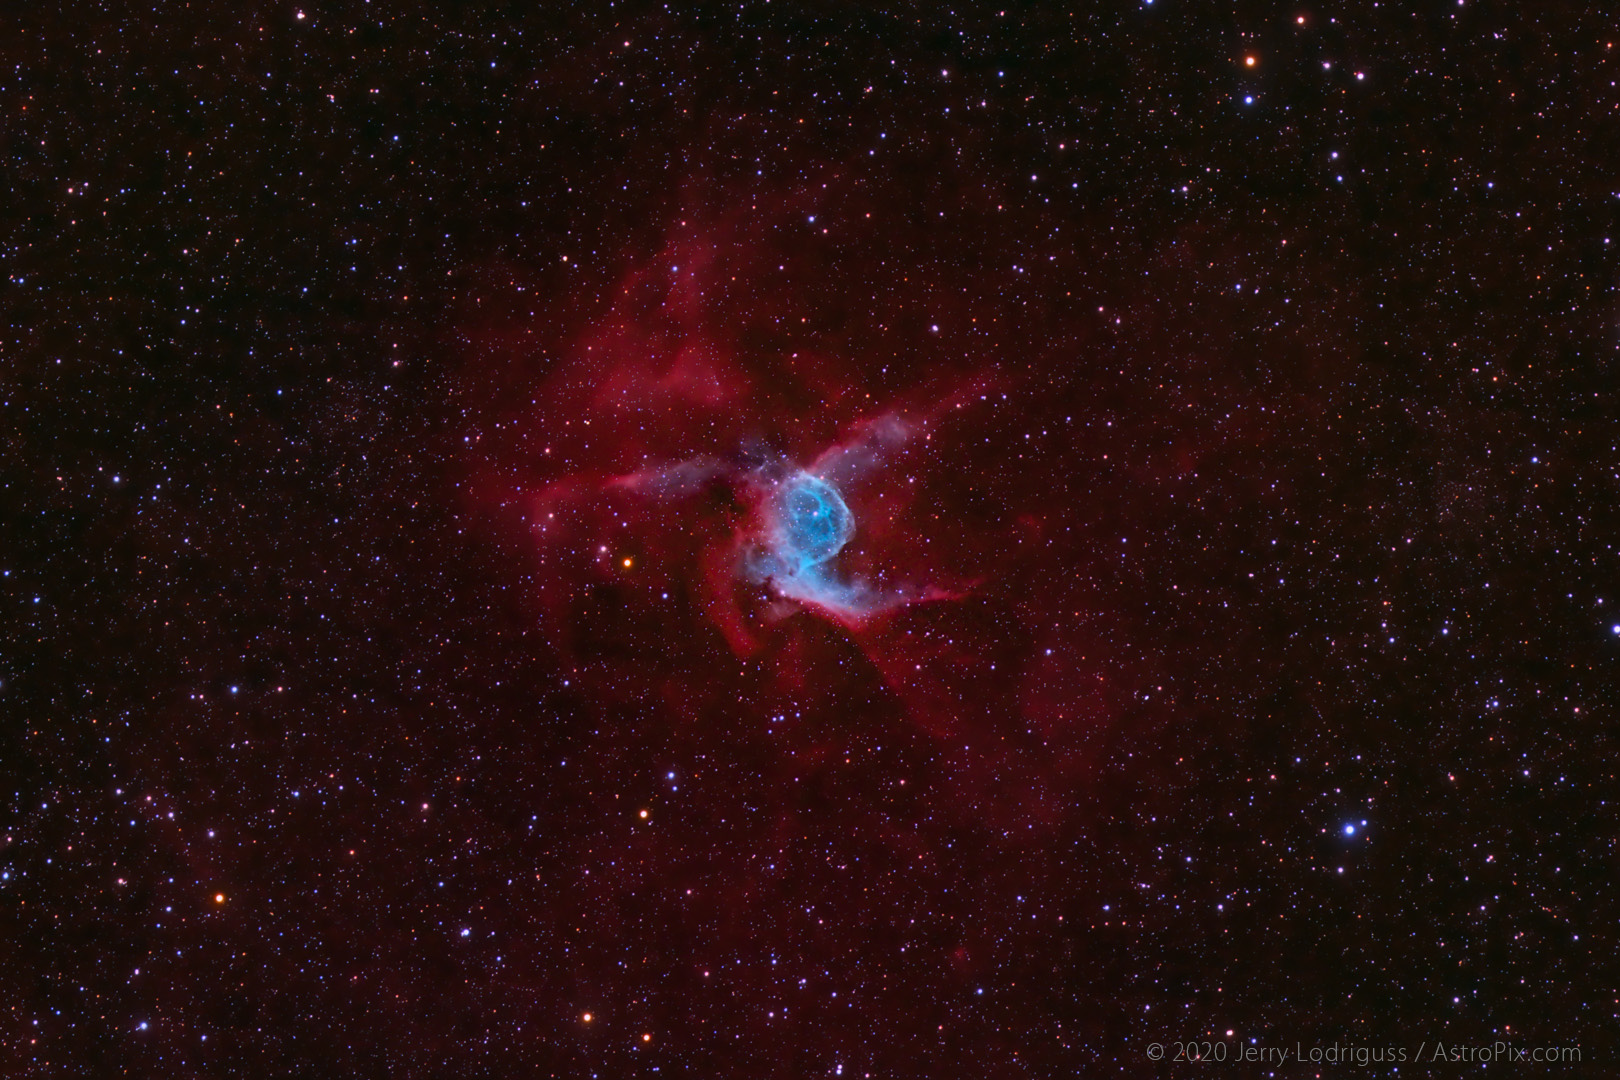 NGC 2359 is Thor's Helmet, a nebula around a Wolf-Rayet star in Canis Major.